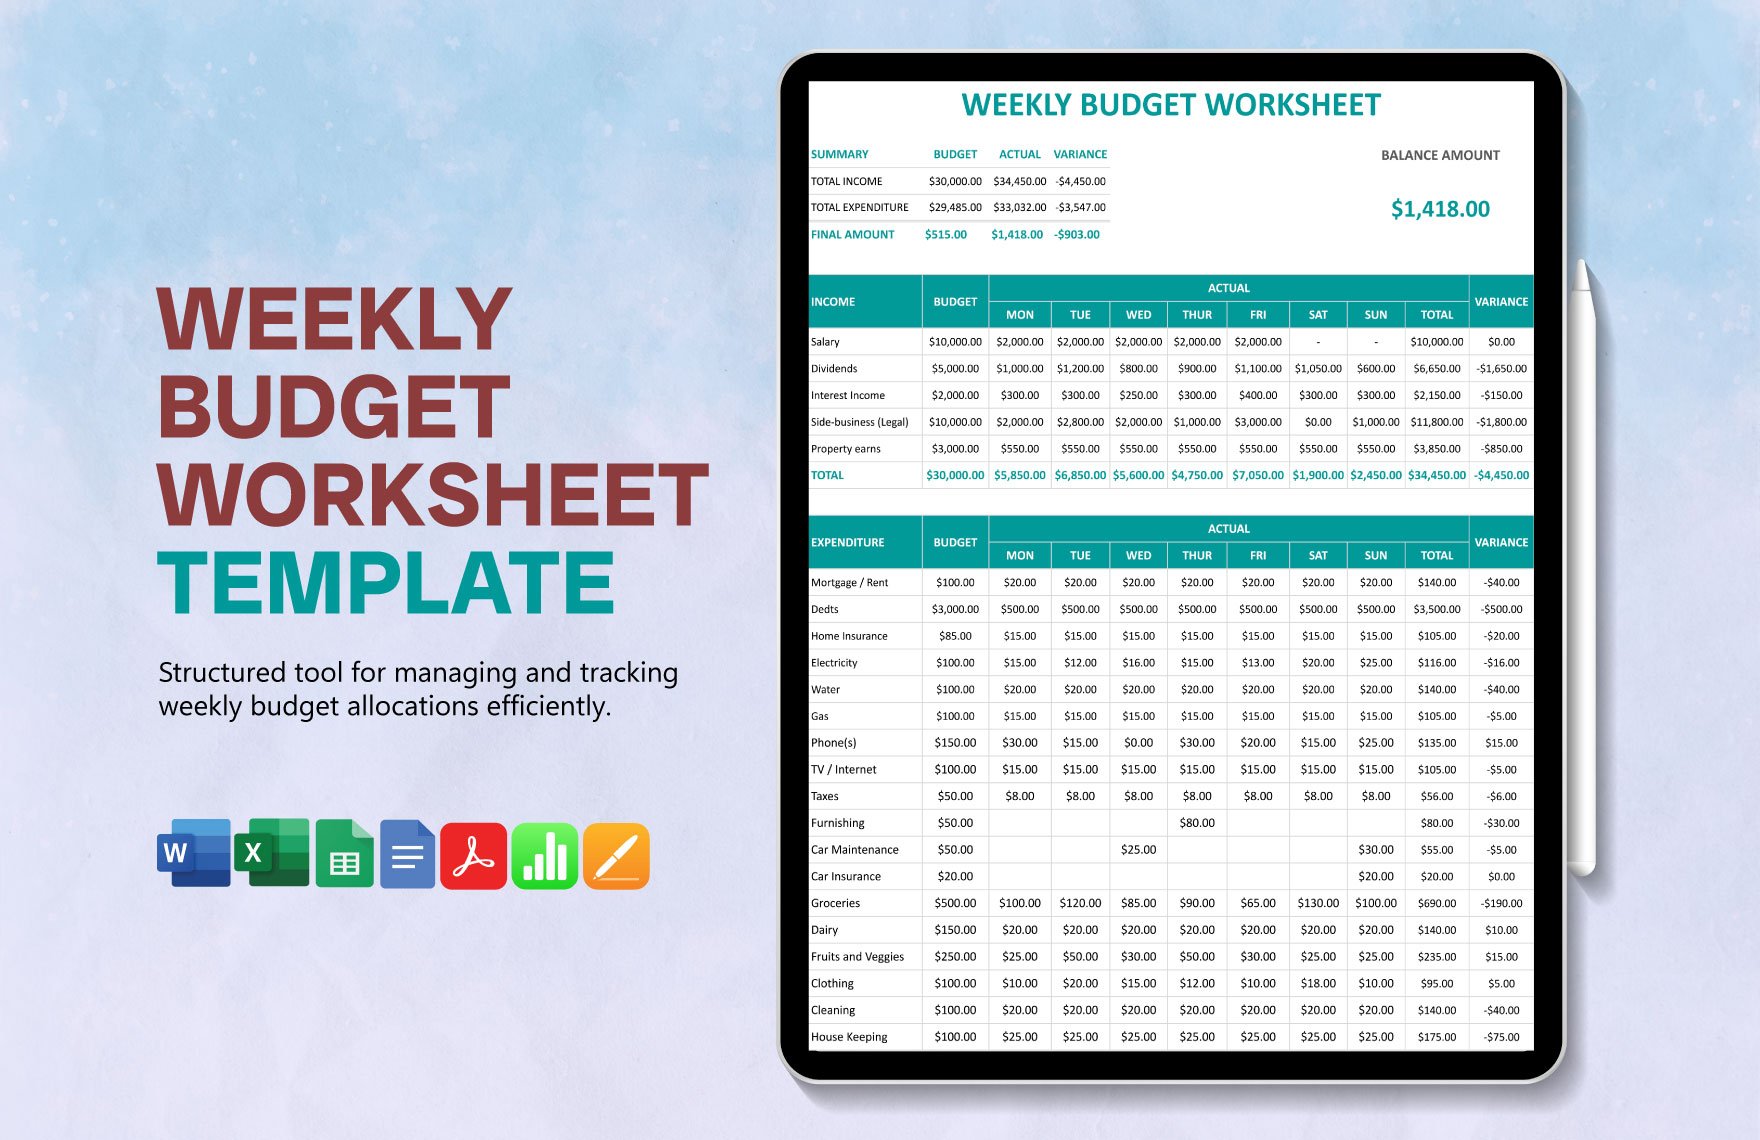 Weekly Budget Worksheet Template in Word, Google Docs, Excel, PDF, Google Sheets, Apple Pages, Apple Numbers